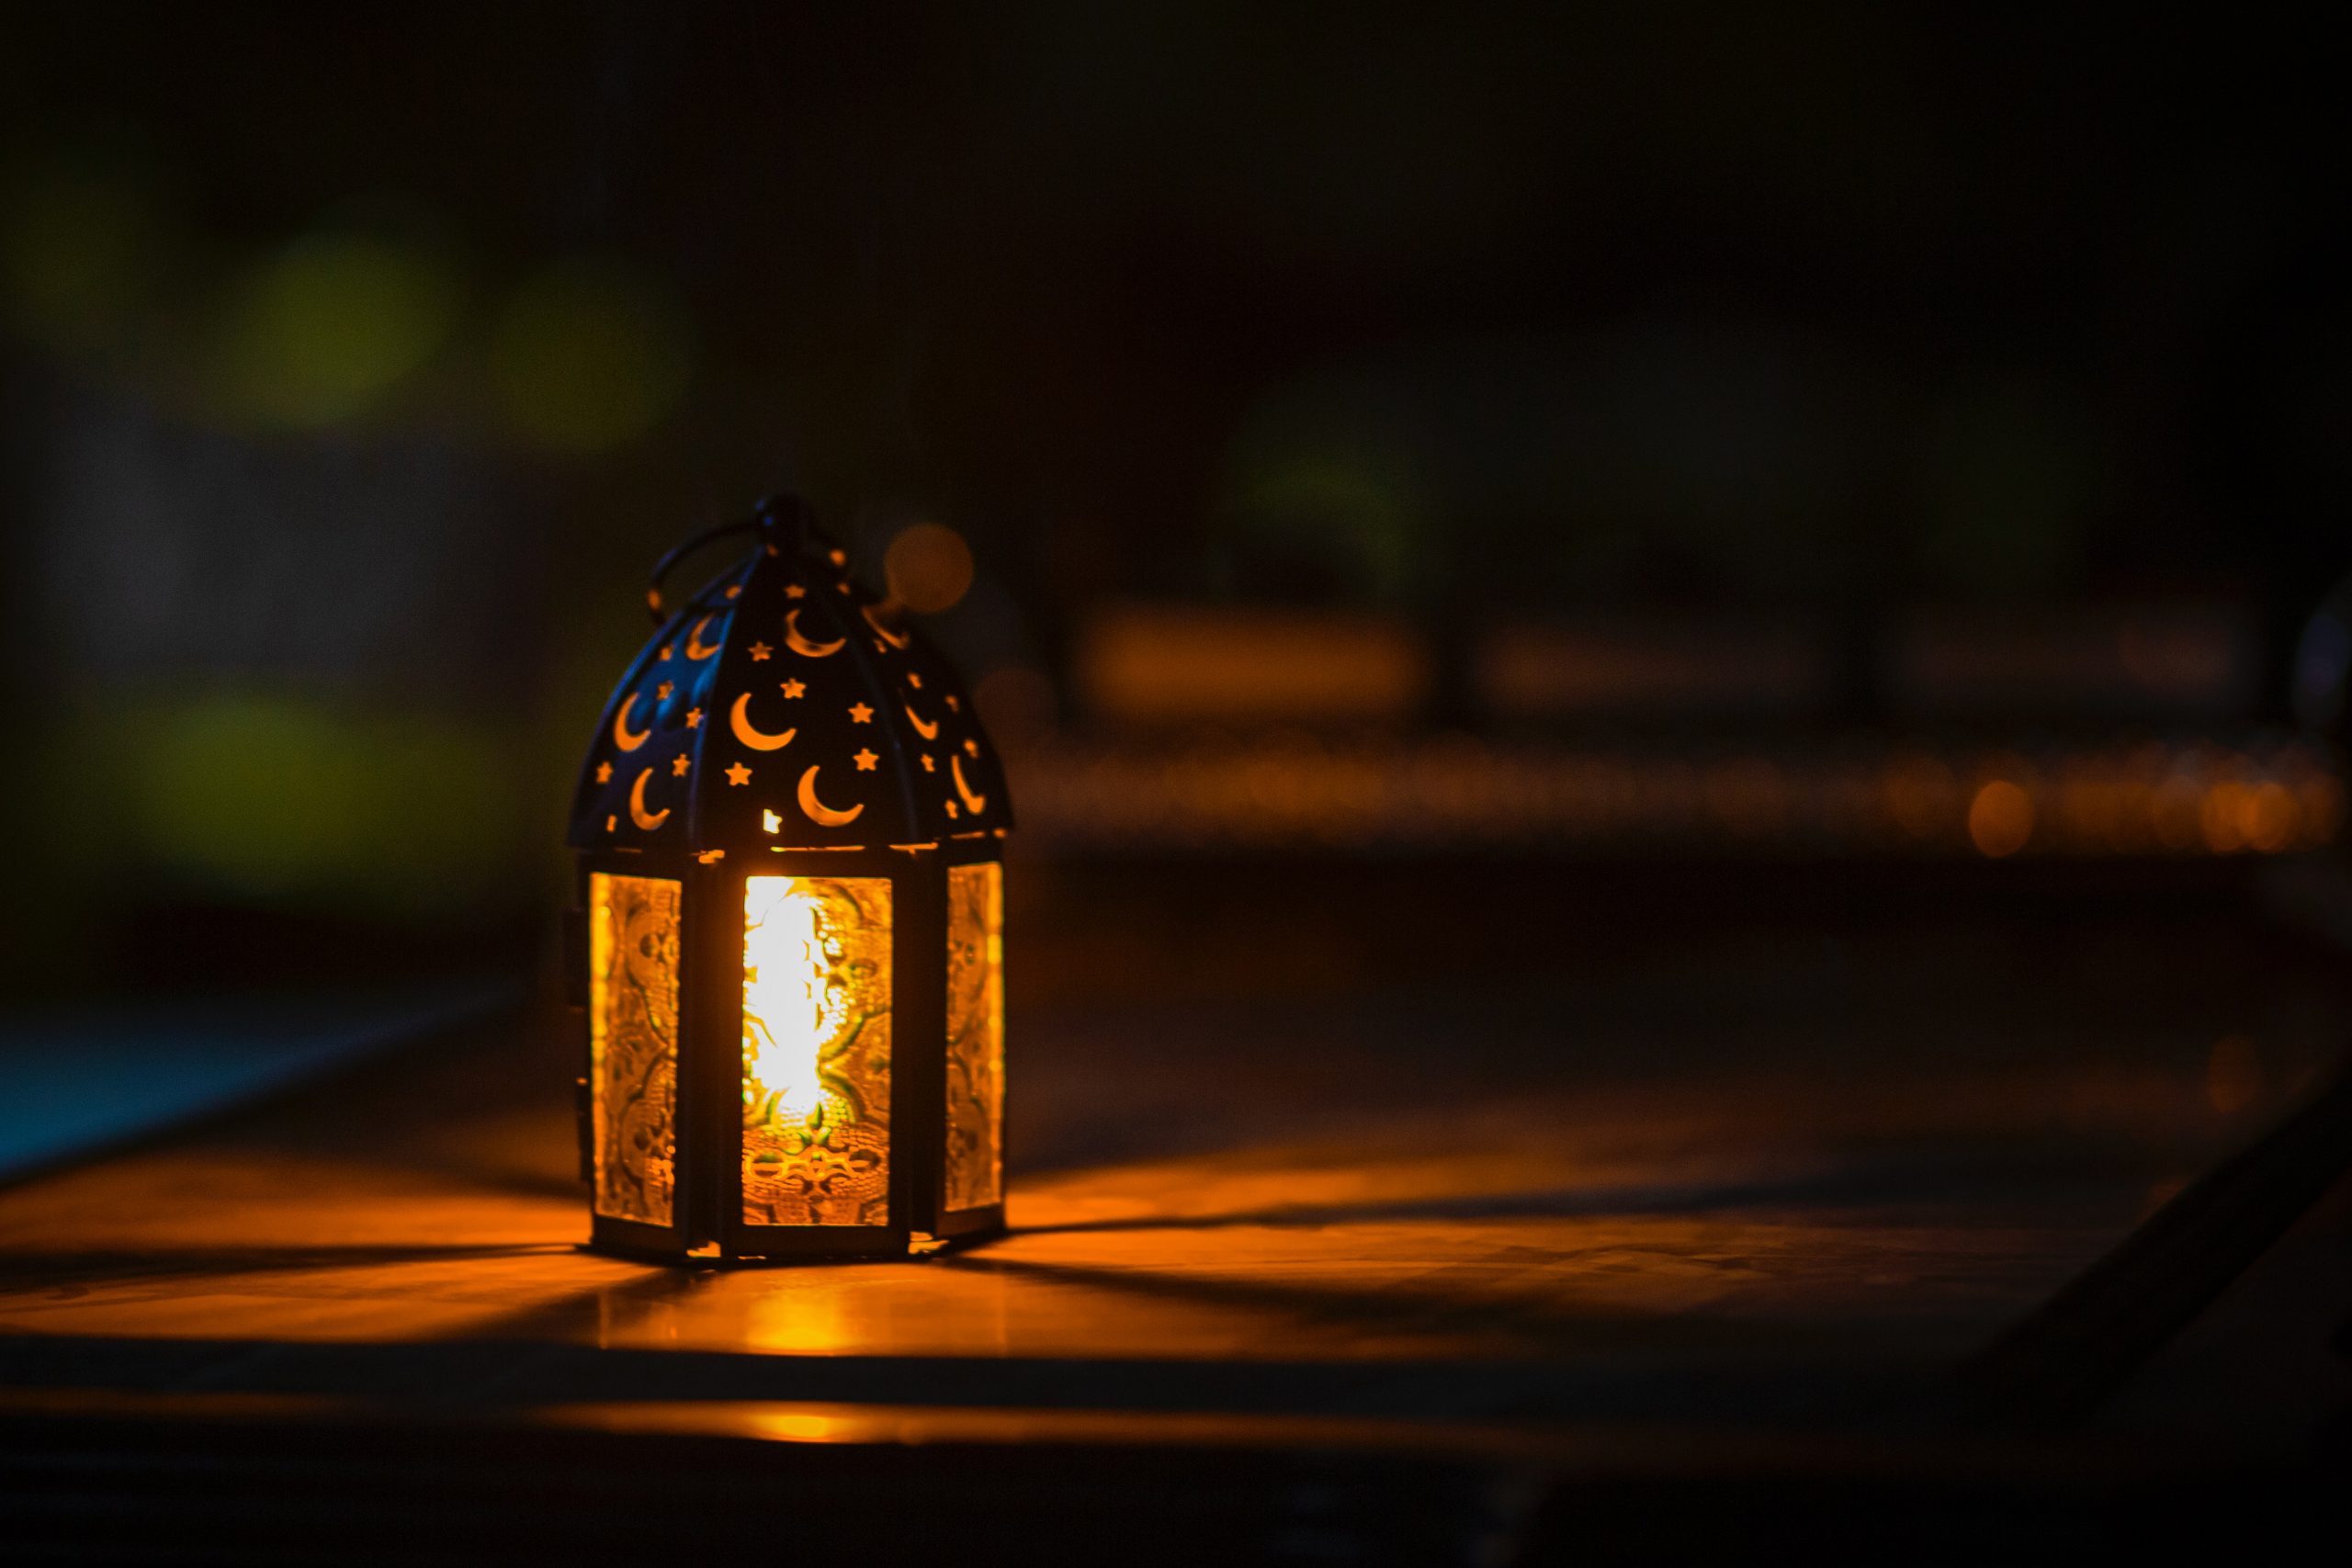 Ramadan Lamp Sitting on a Table with Ambiance Lighting and Shadows